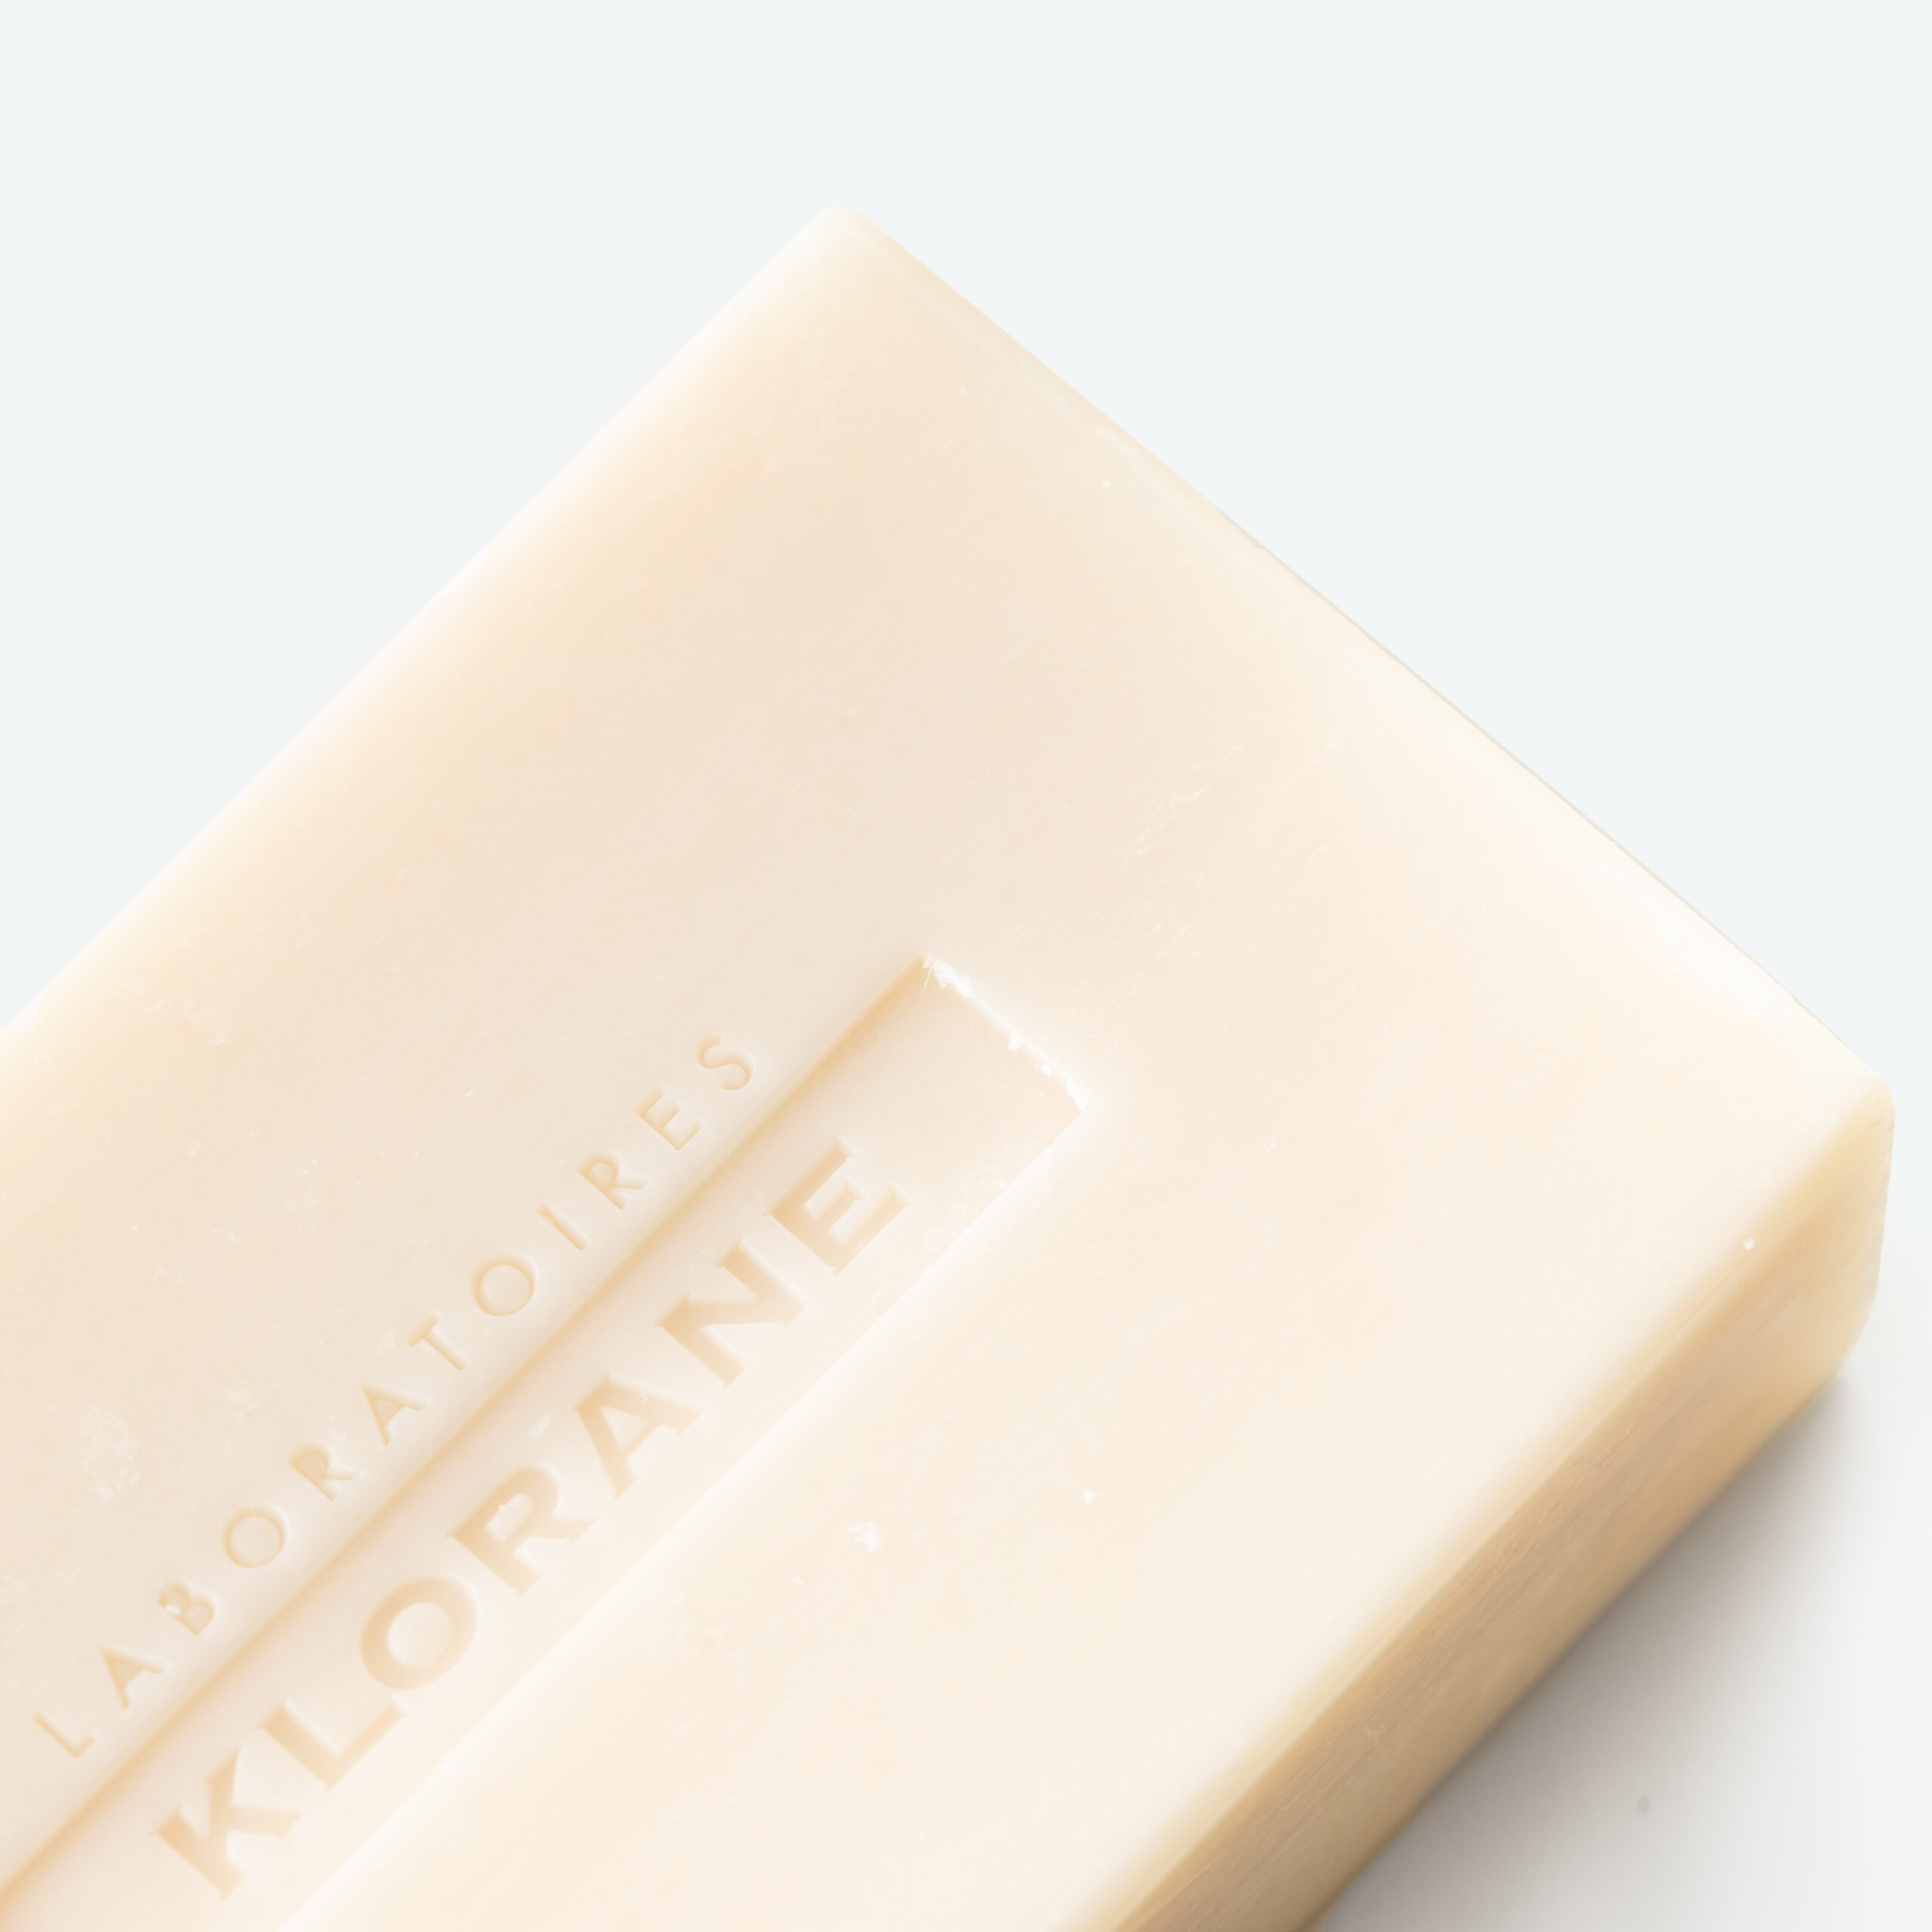 Klorane launches an eco-conscious Shampoo Bar with organically farmed Oat